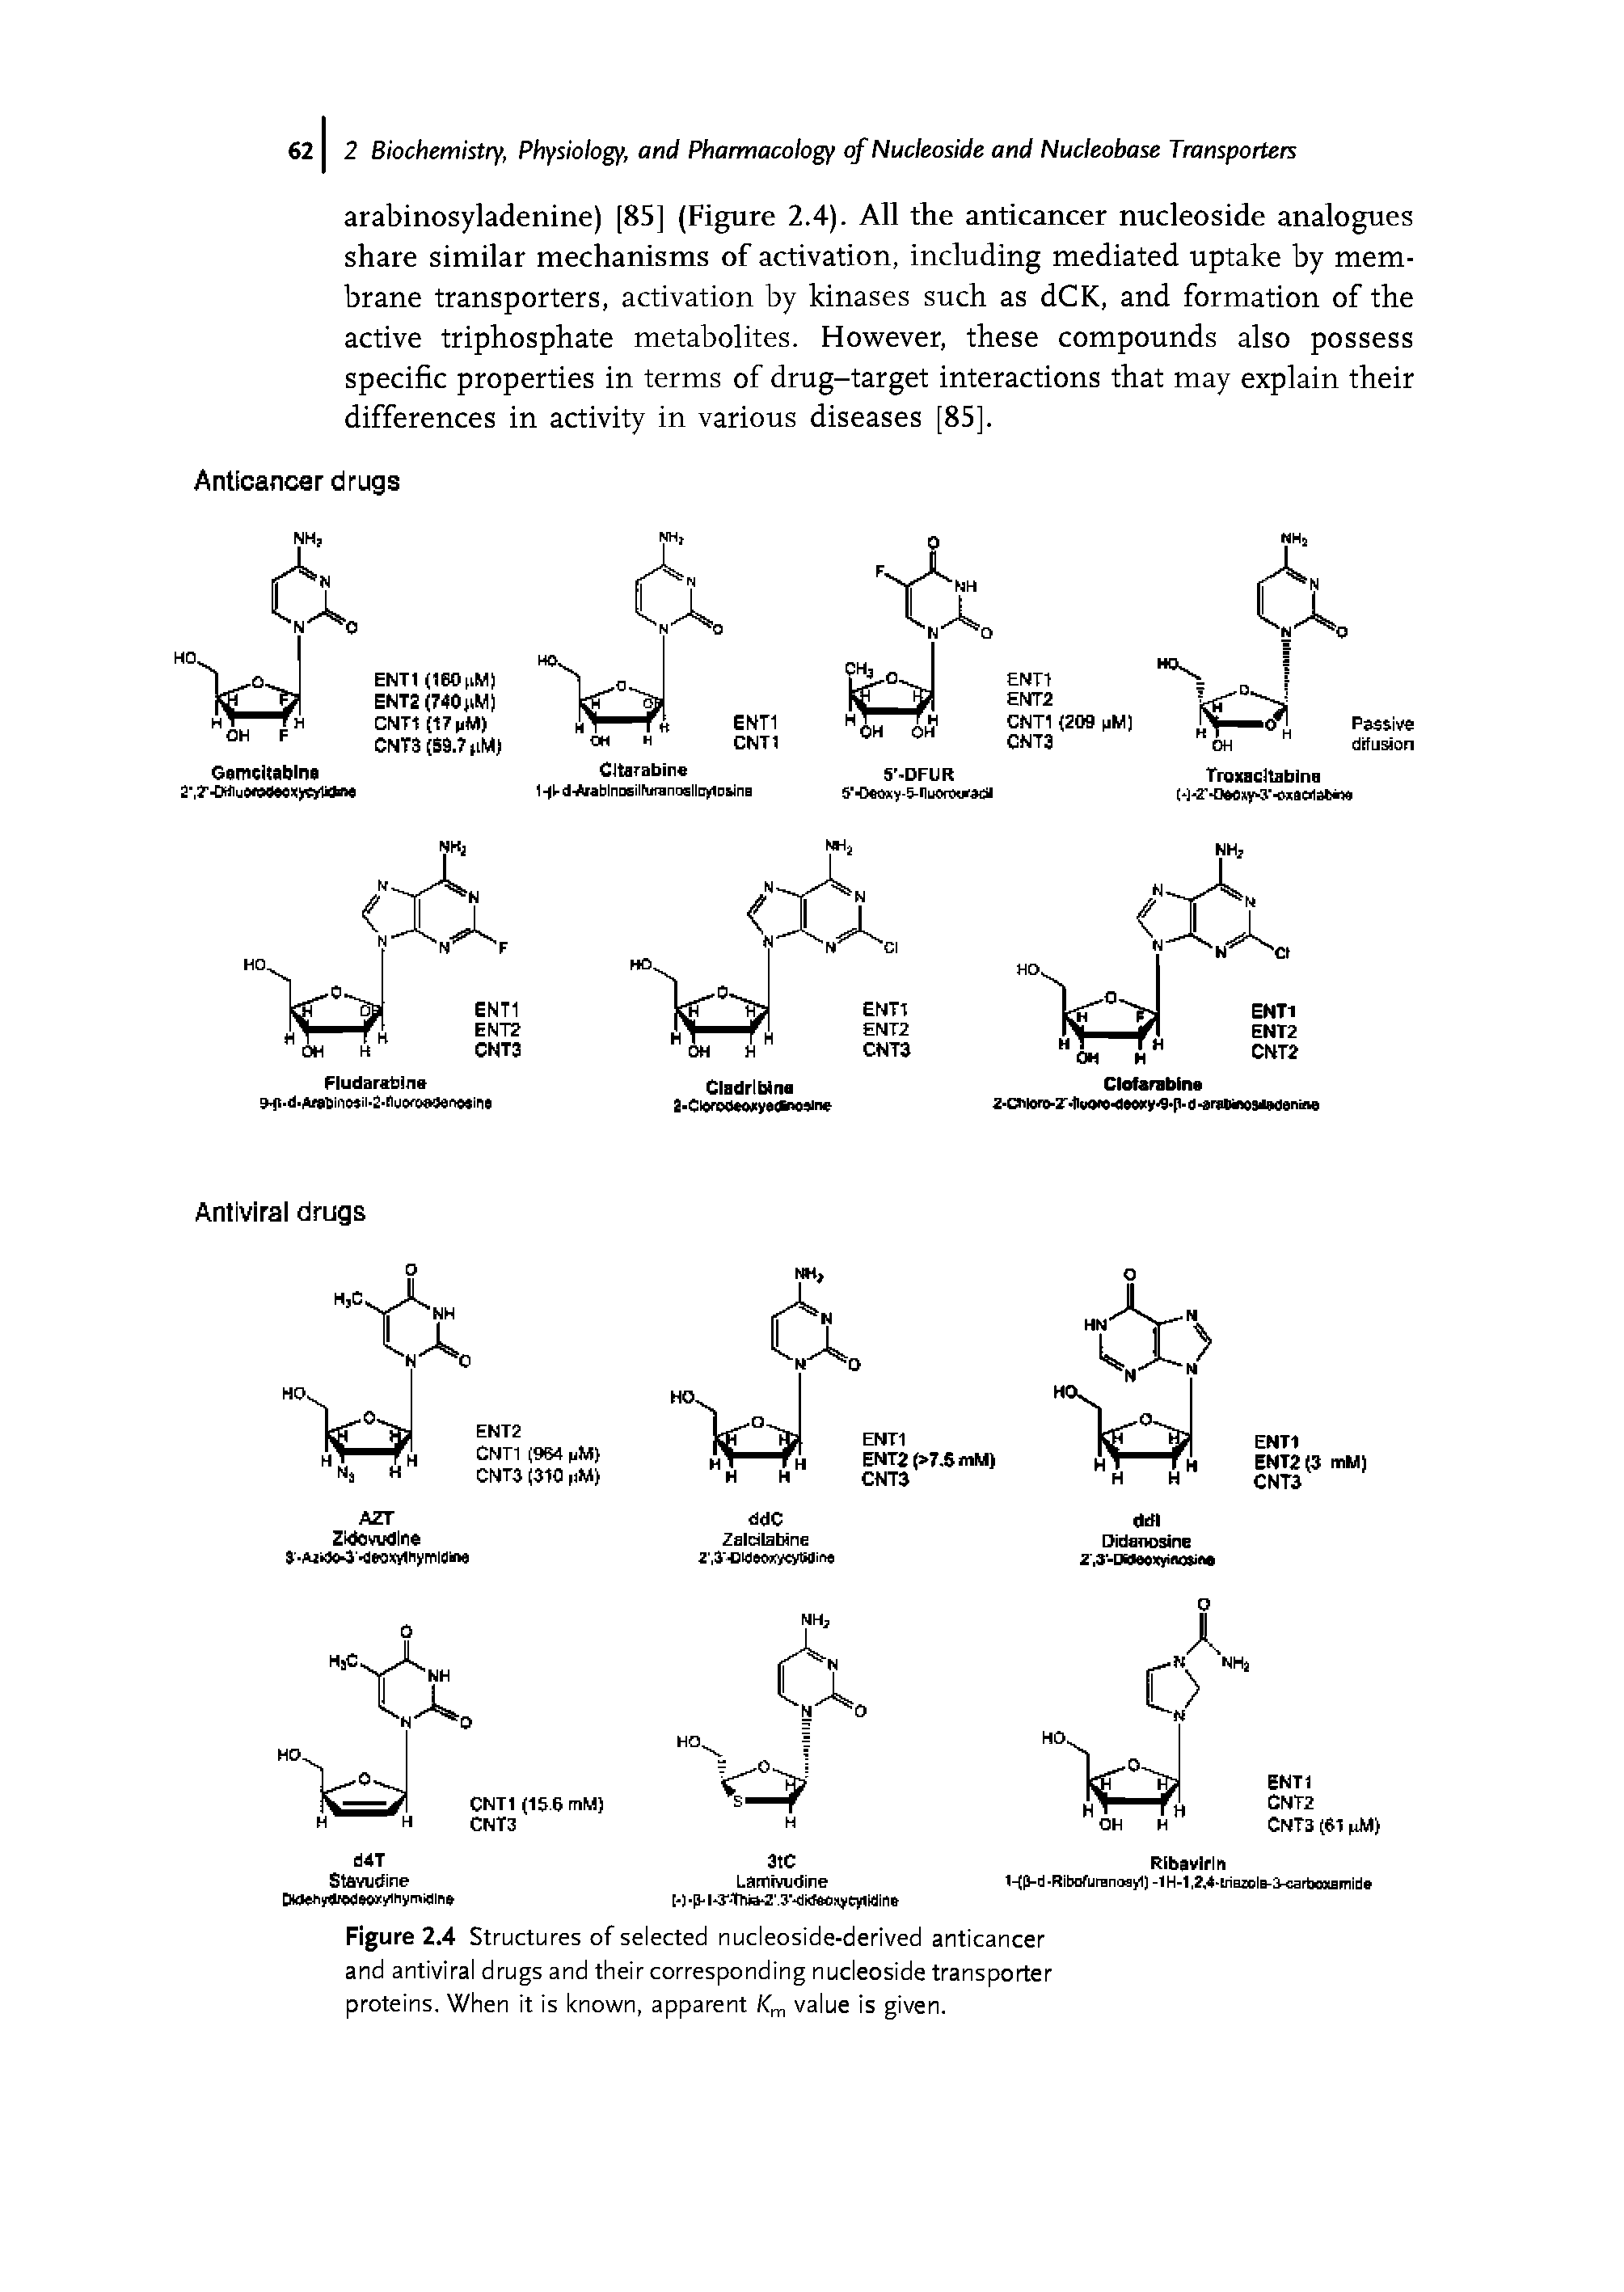 Figure 2.4 Structures of selected nucleoside-derived anticancer and antiviral drugs and their corresponding nucleoside transporter proteins. When it is known, apparent value is given.